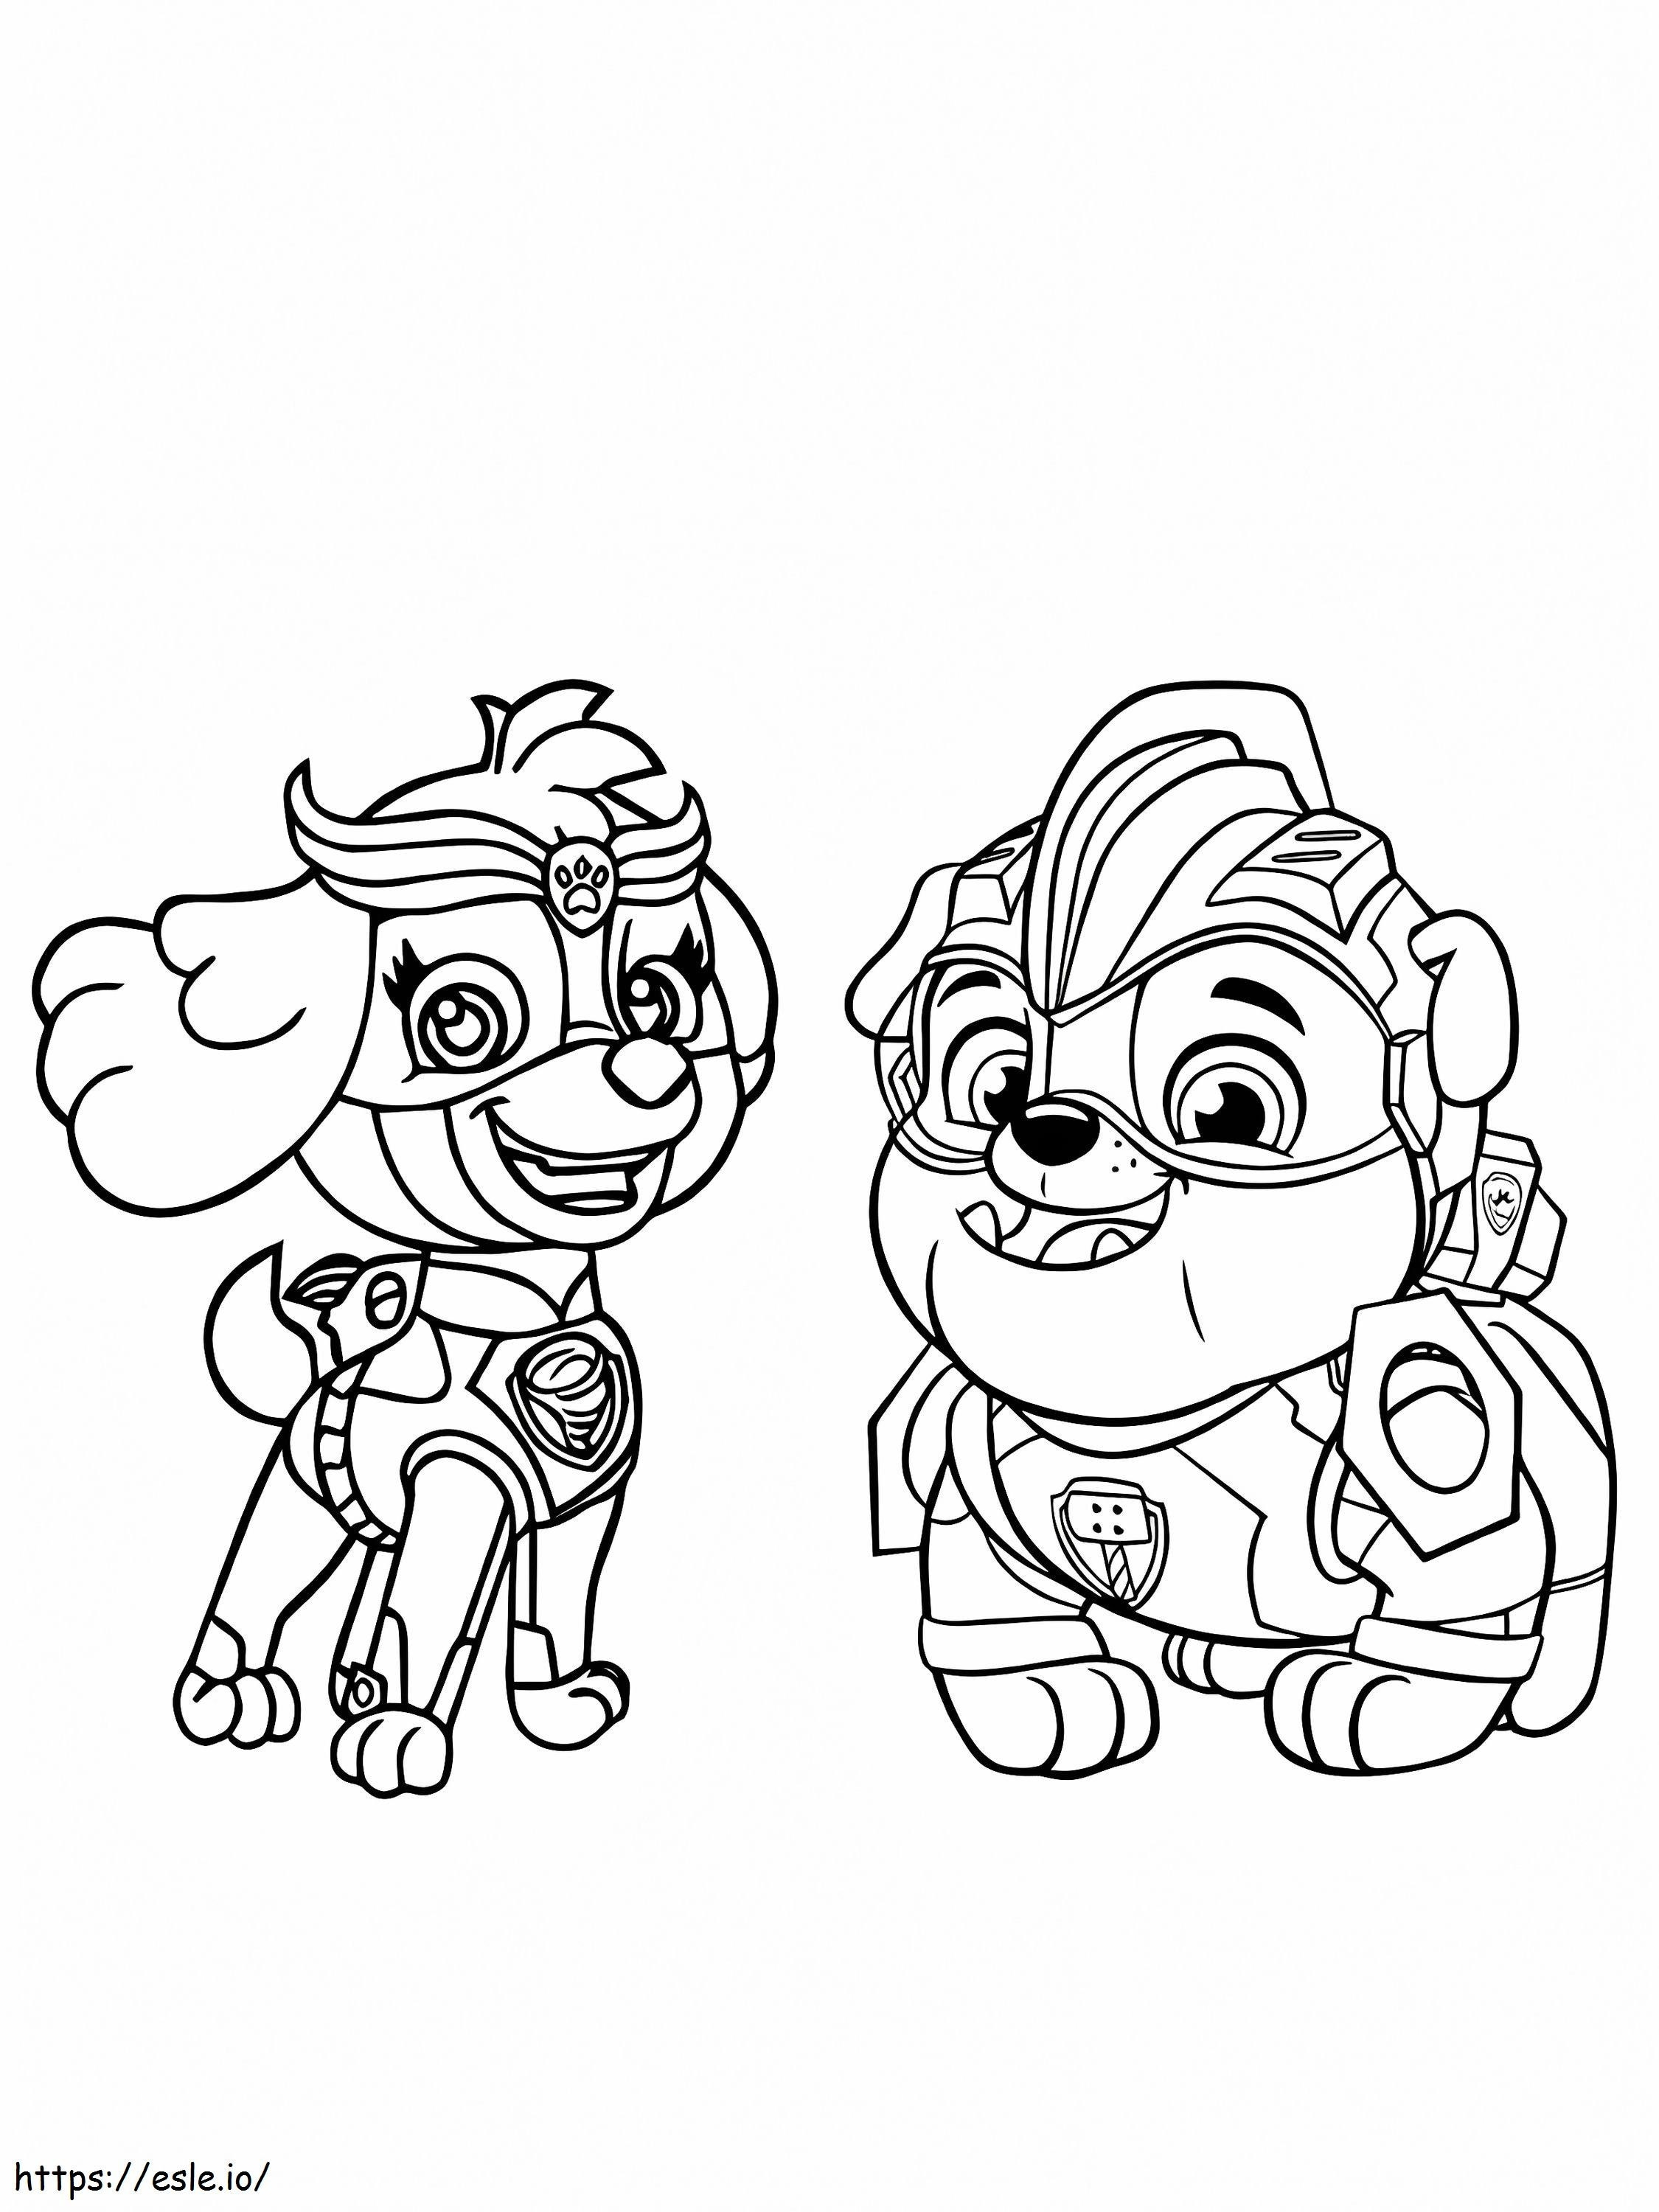 Skye And Rubble From Paw Patrol coloring page